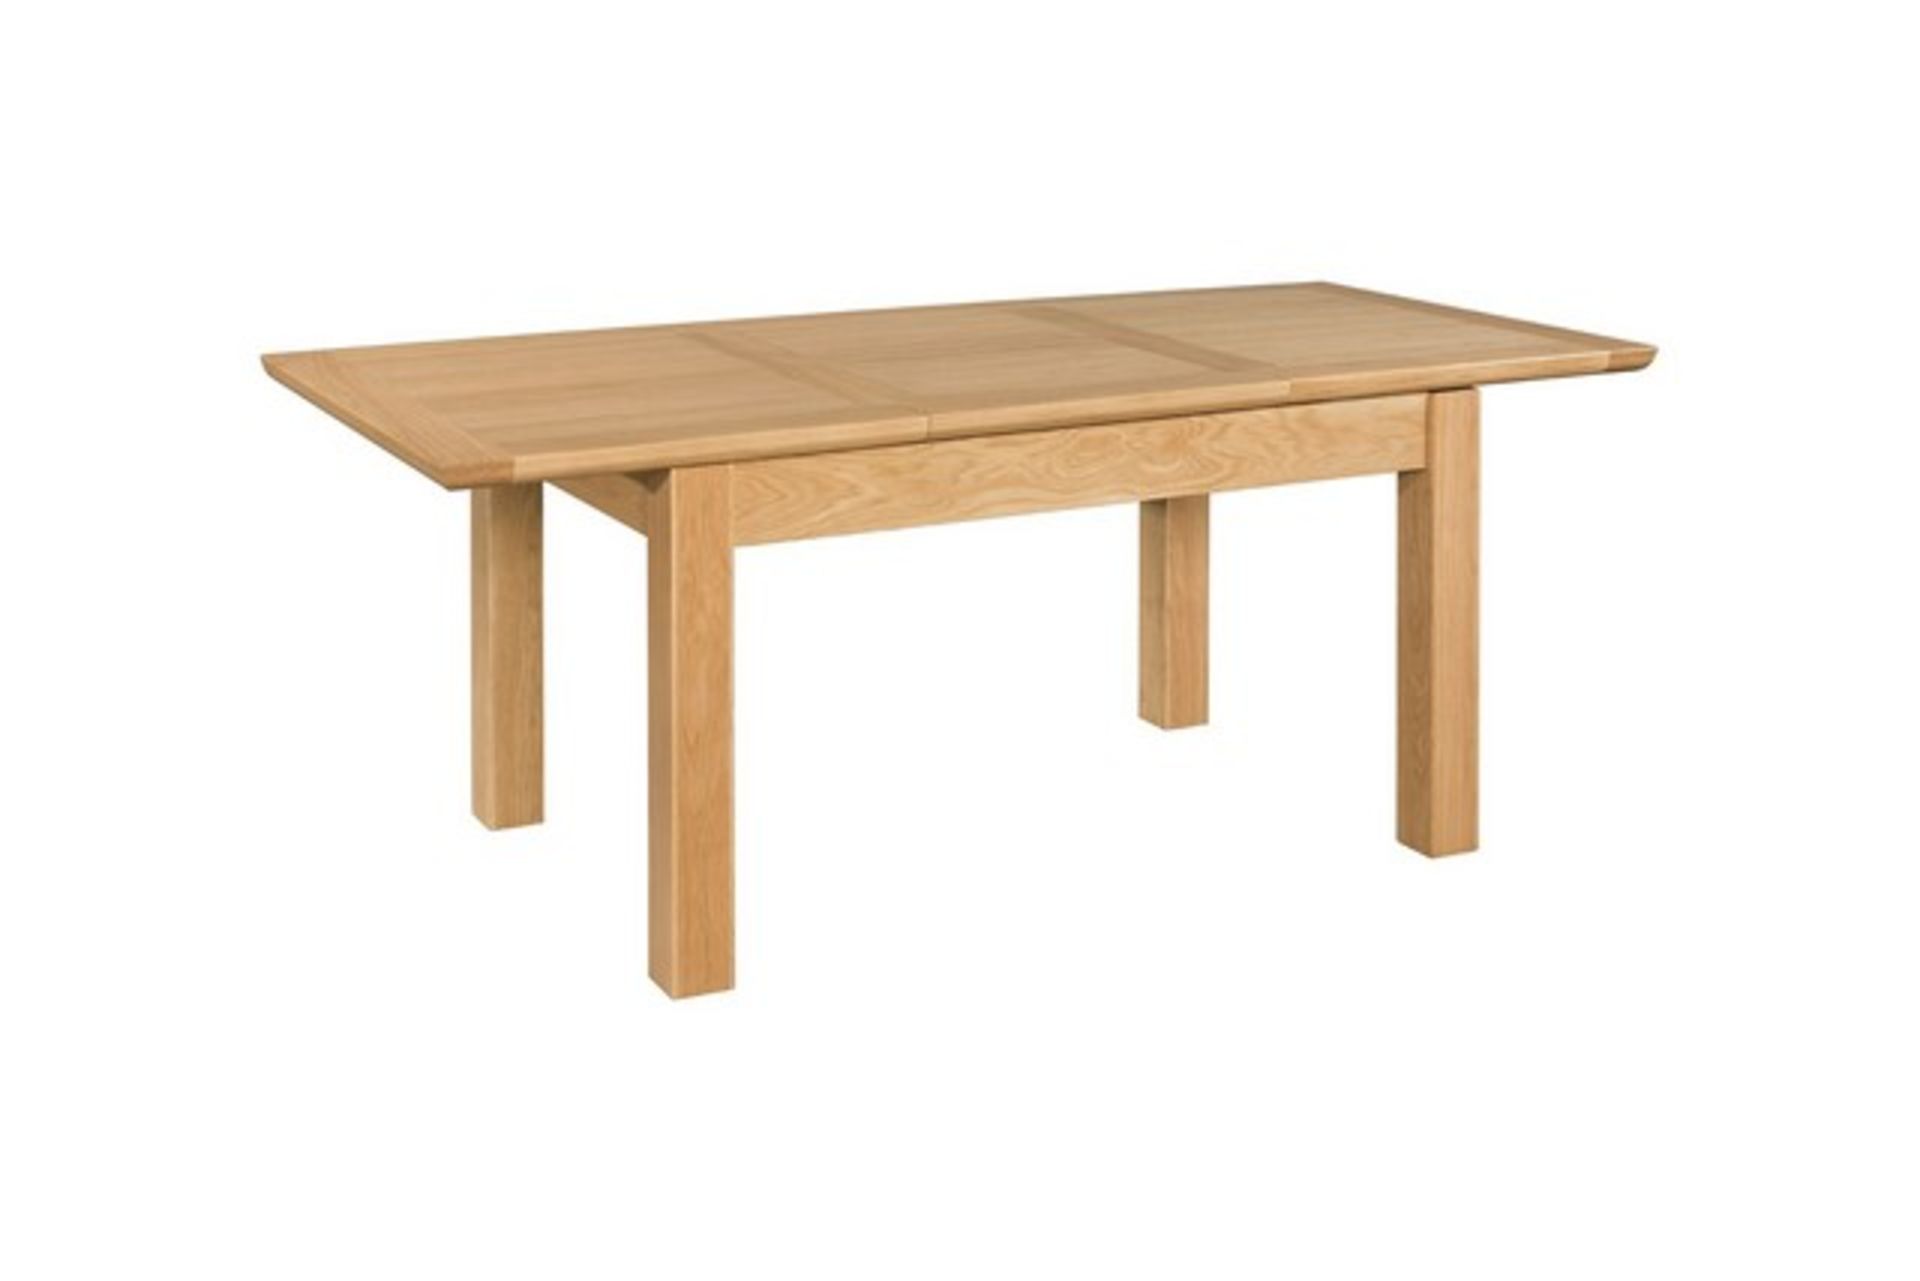 V Brand New Siena 140x90 Butterfly Extension Table (extends to 200cm) RRP519 (Devonshirepineandoak. - Image 2 of 2